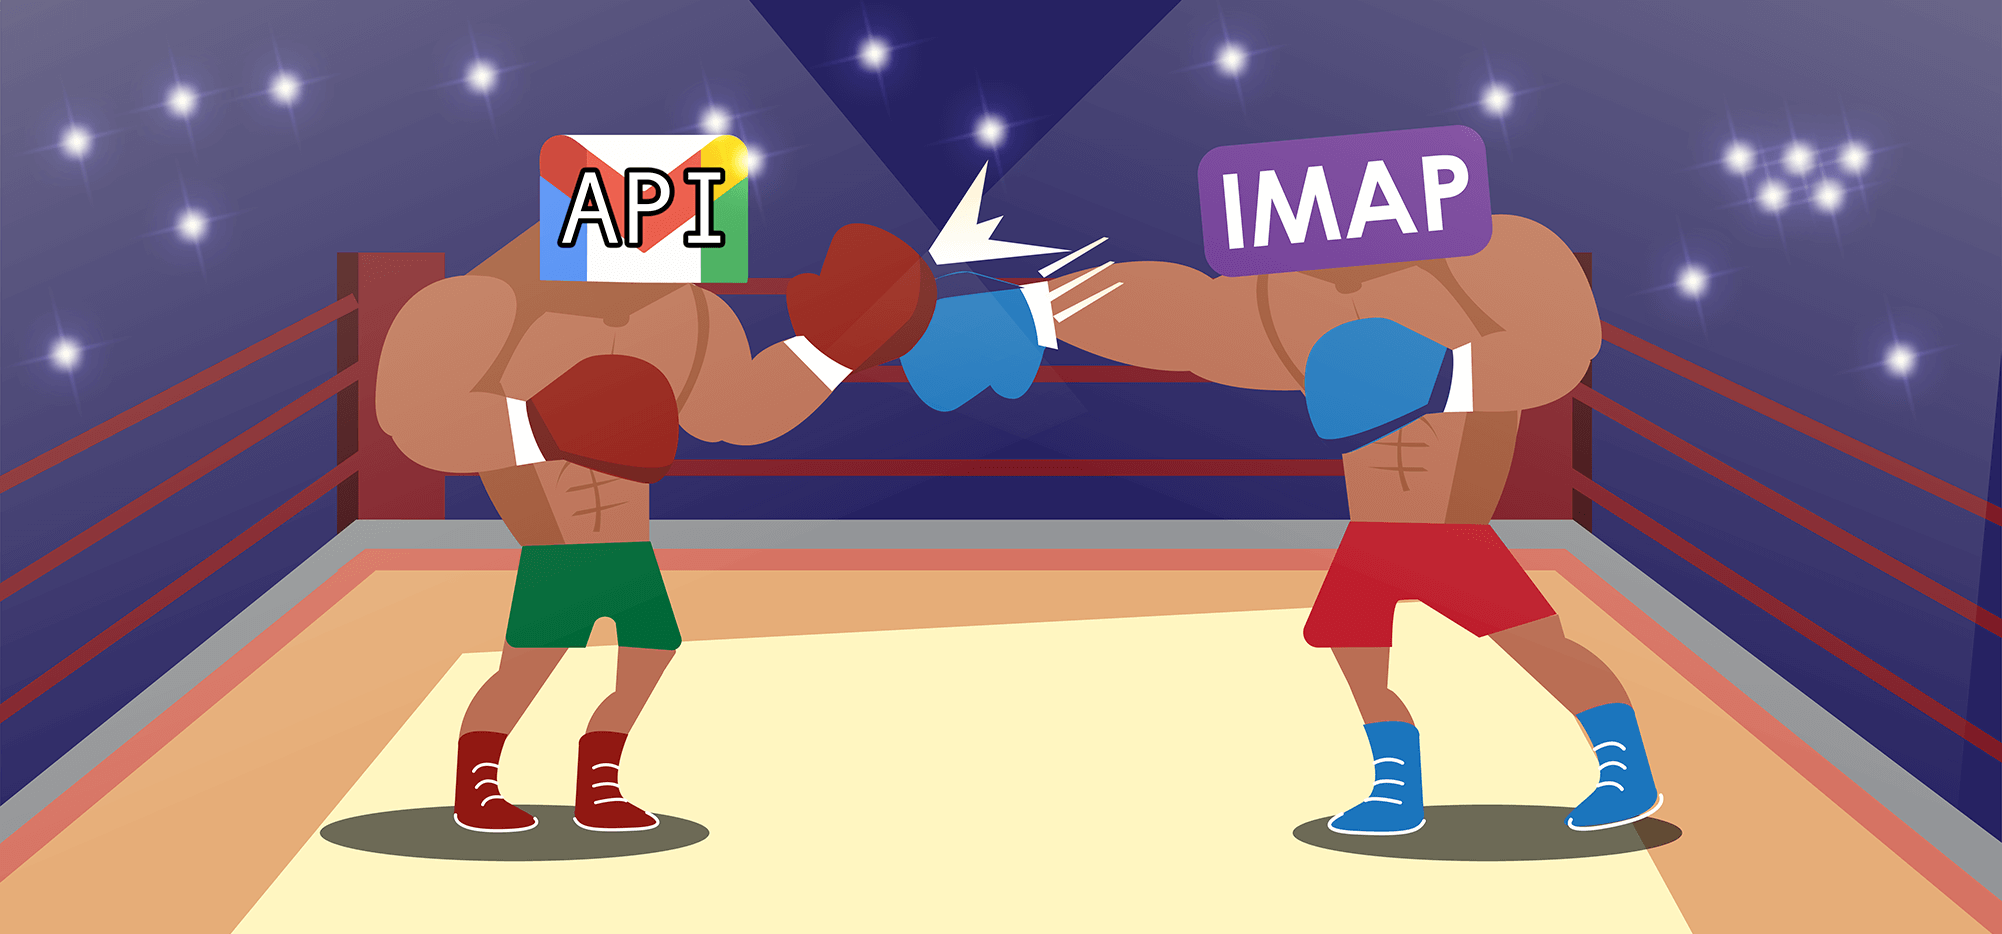 Gmail API vs IMAP Cold Email Platforms: Which Is Better for You?